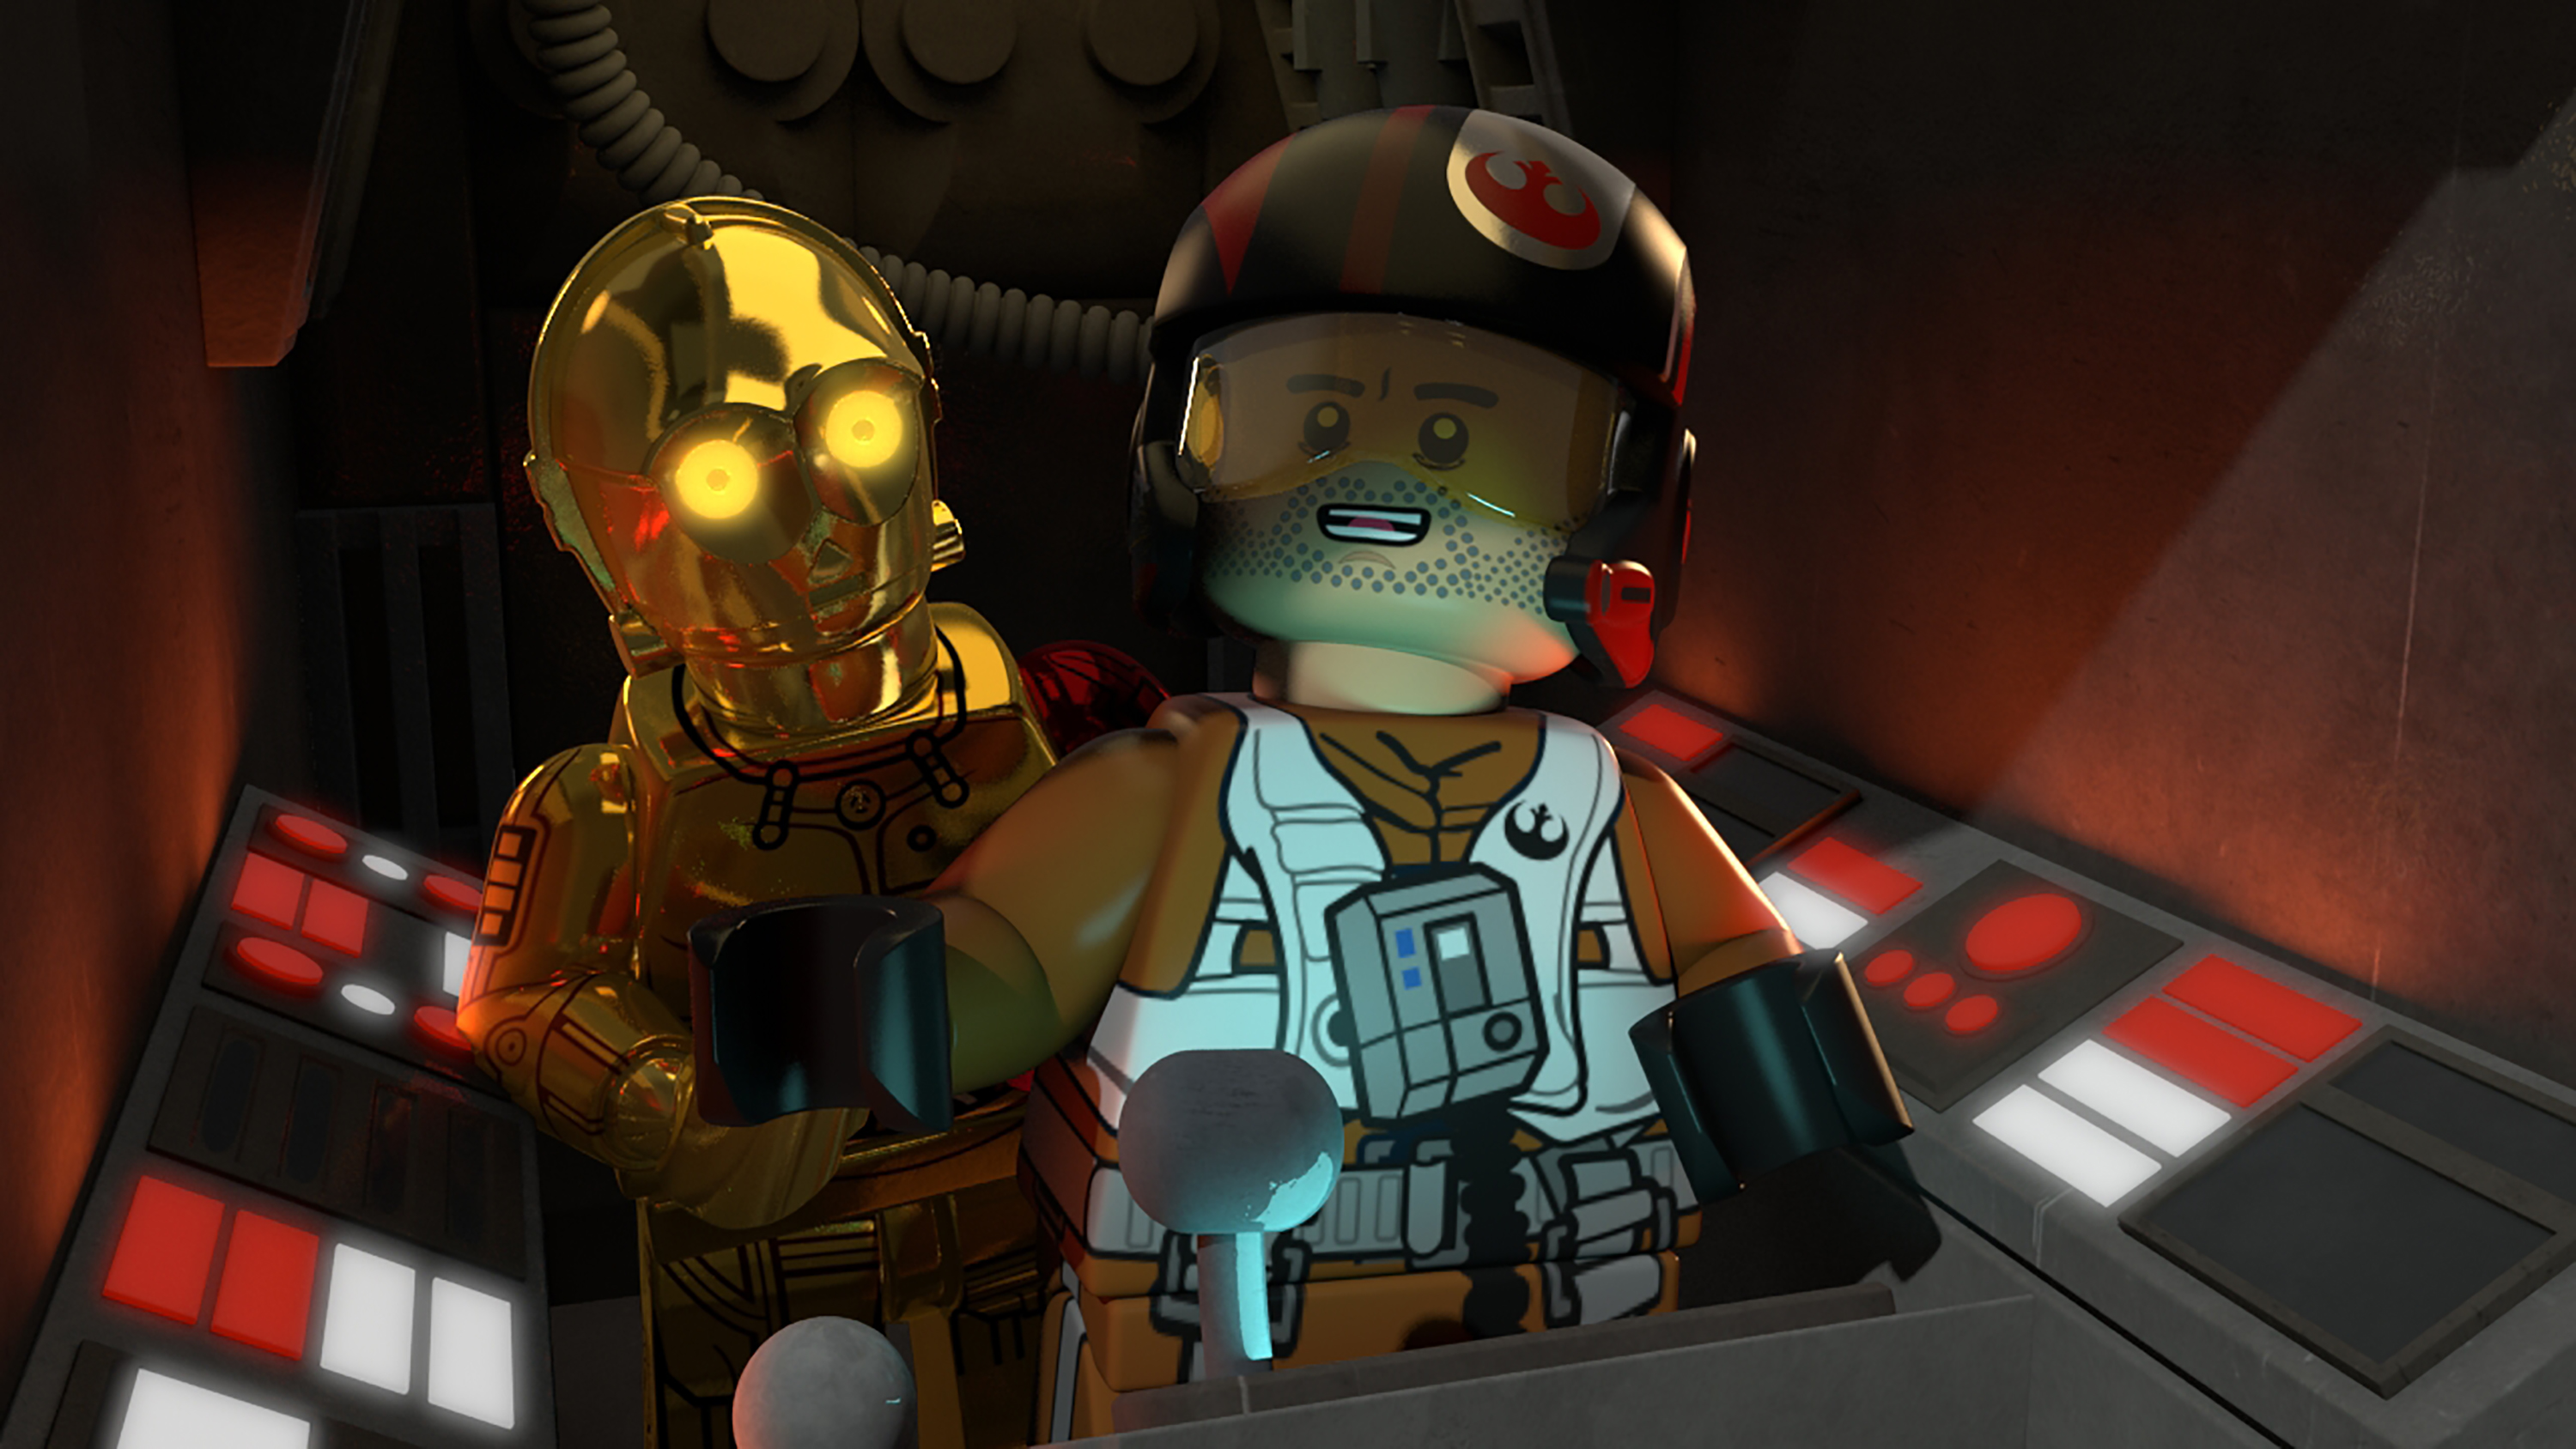 The Trailer For 'LEGO Star Wars: The Freemaker Adventures'